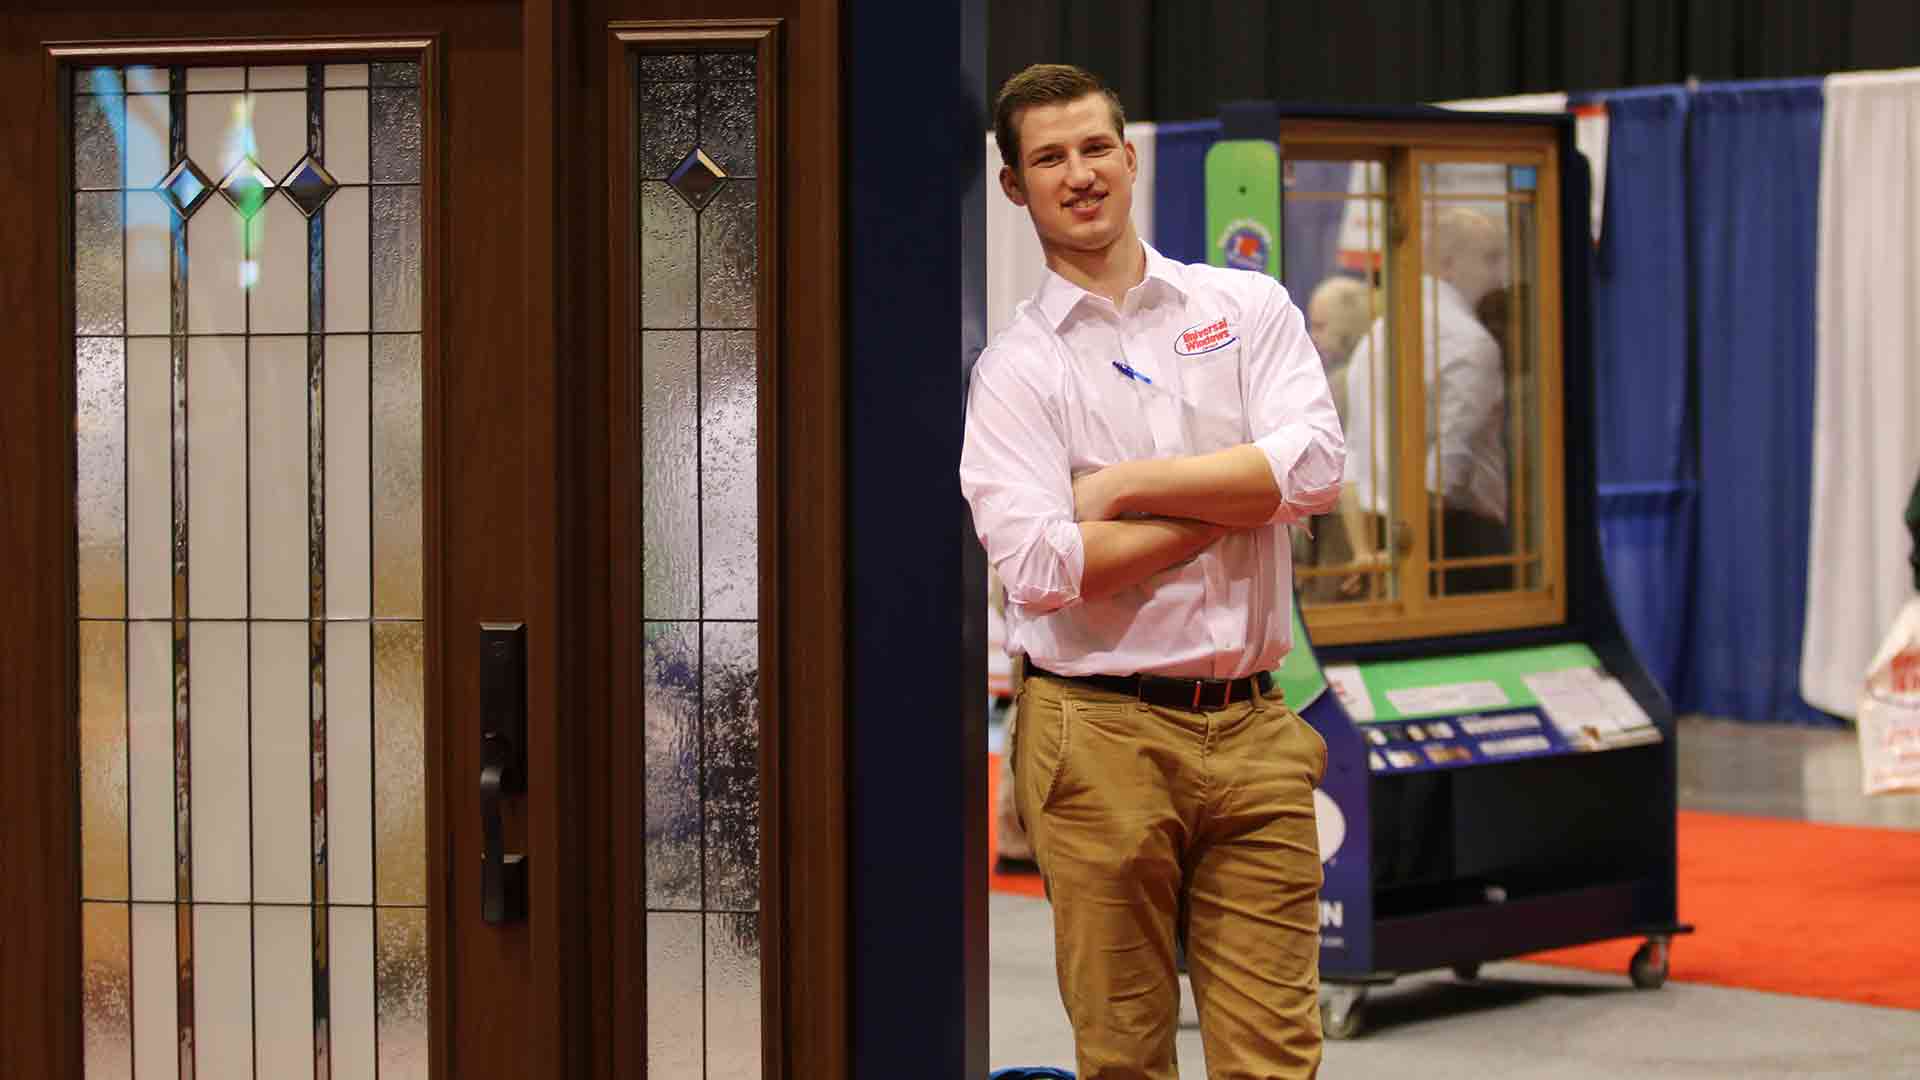 marketer at home show leaning on door